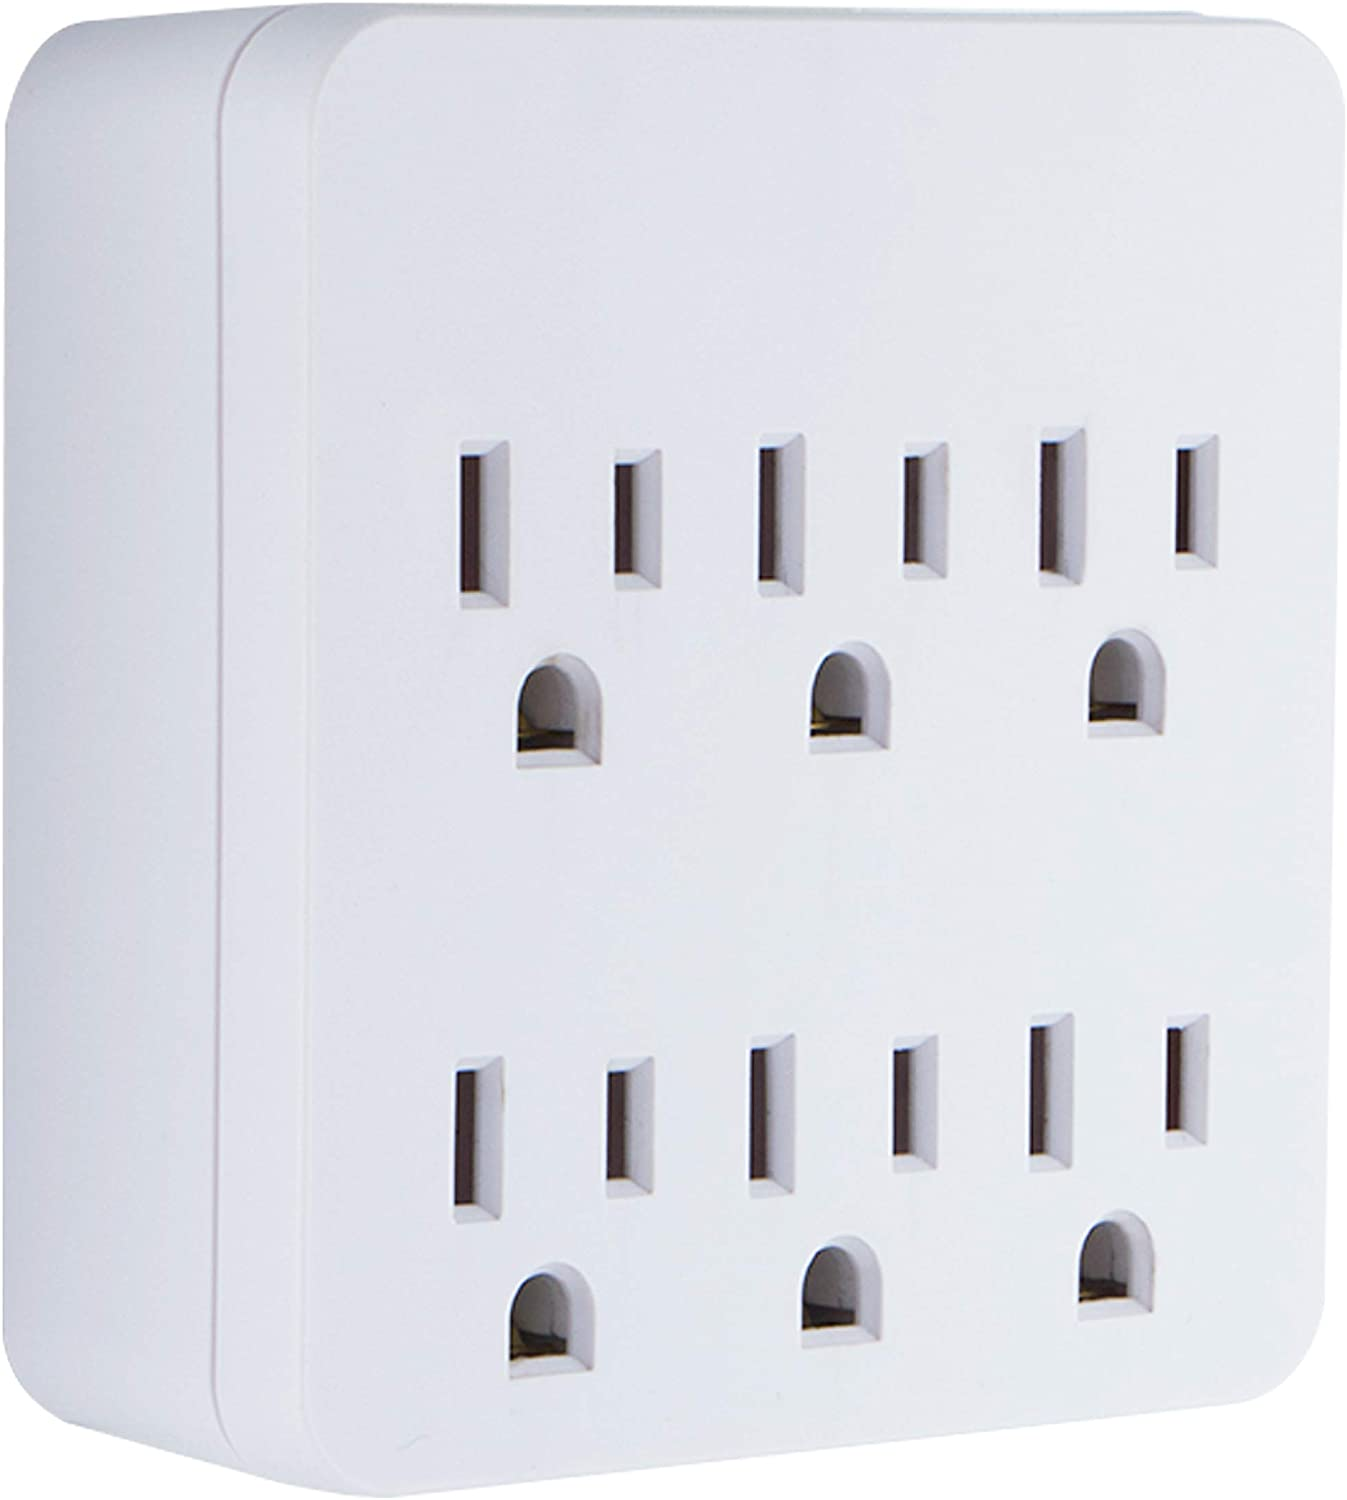 6-Outlet Extender Surge Protector, Tamper-Resistant Safety Outlets, Automatic Shutdown Technology, 440 Joules, Great for Holiday Lighting/Decorations, 3-Prong, White